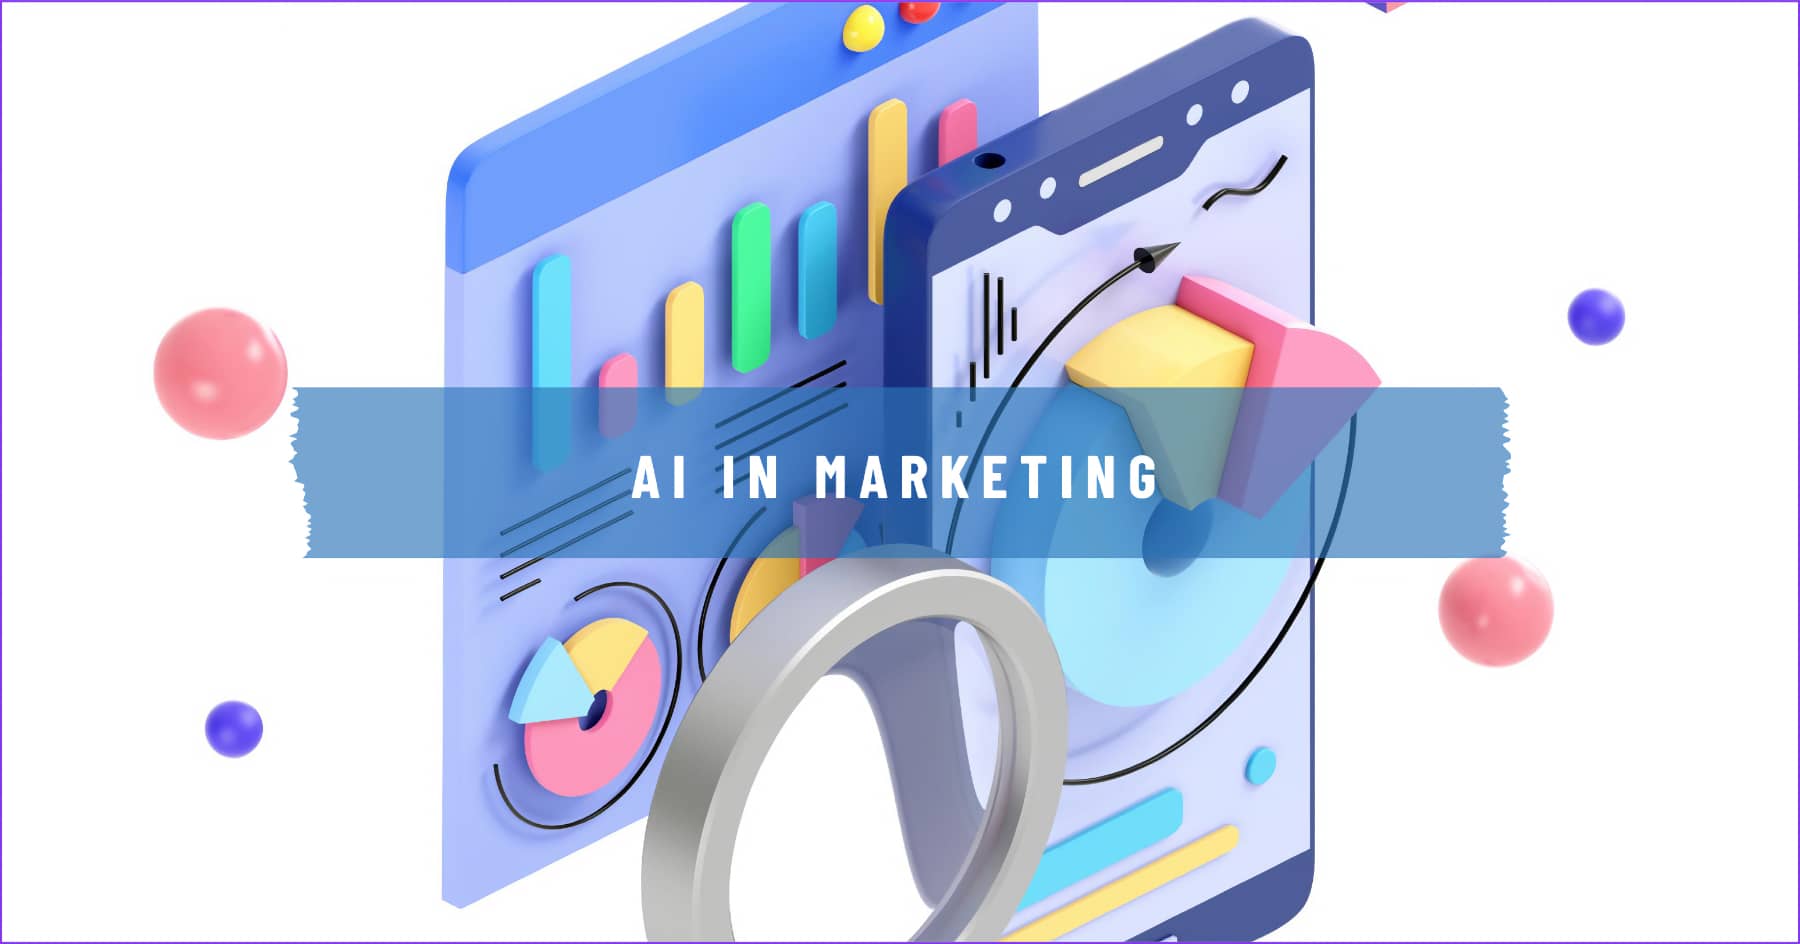 How is AI Used in Marketing?